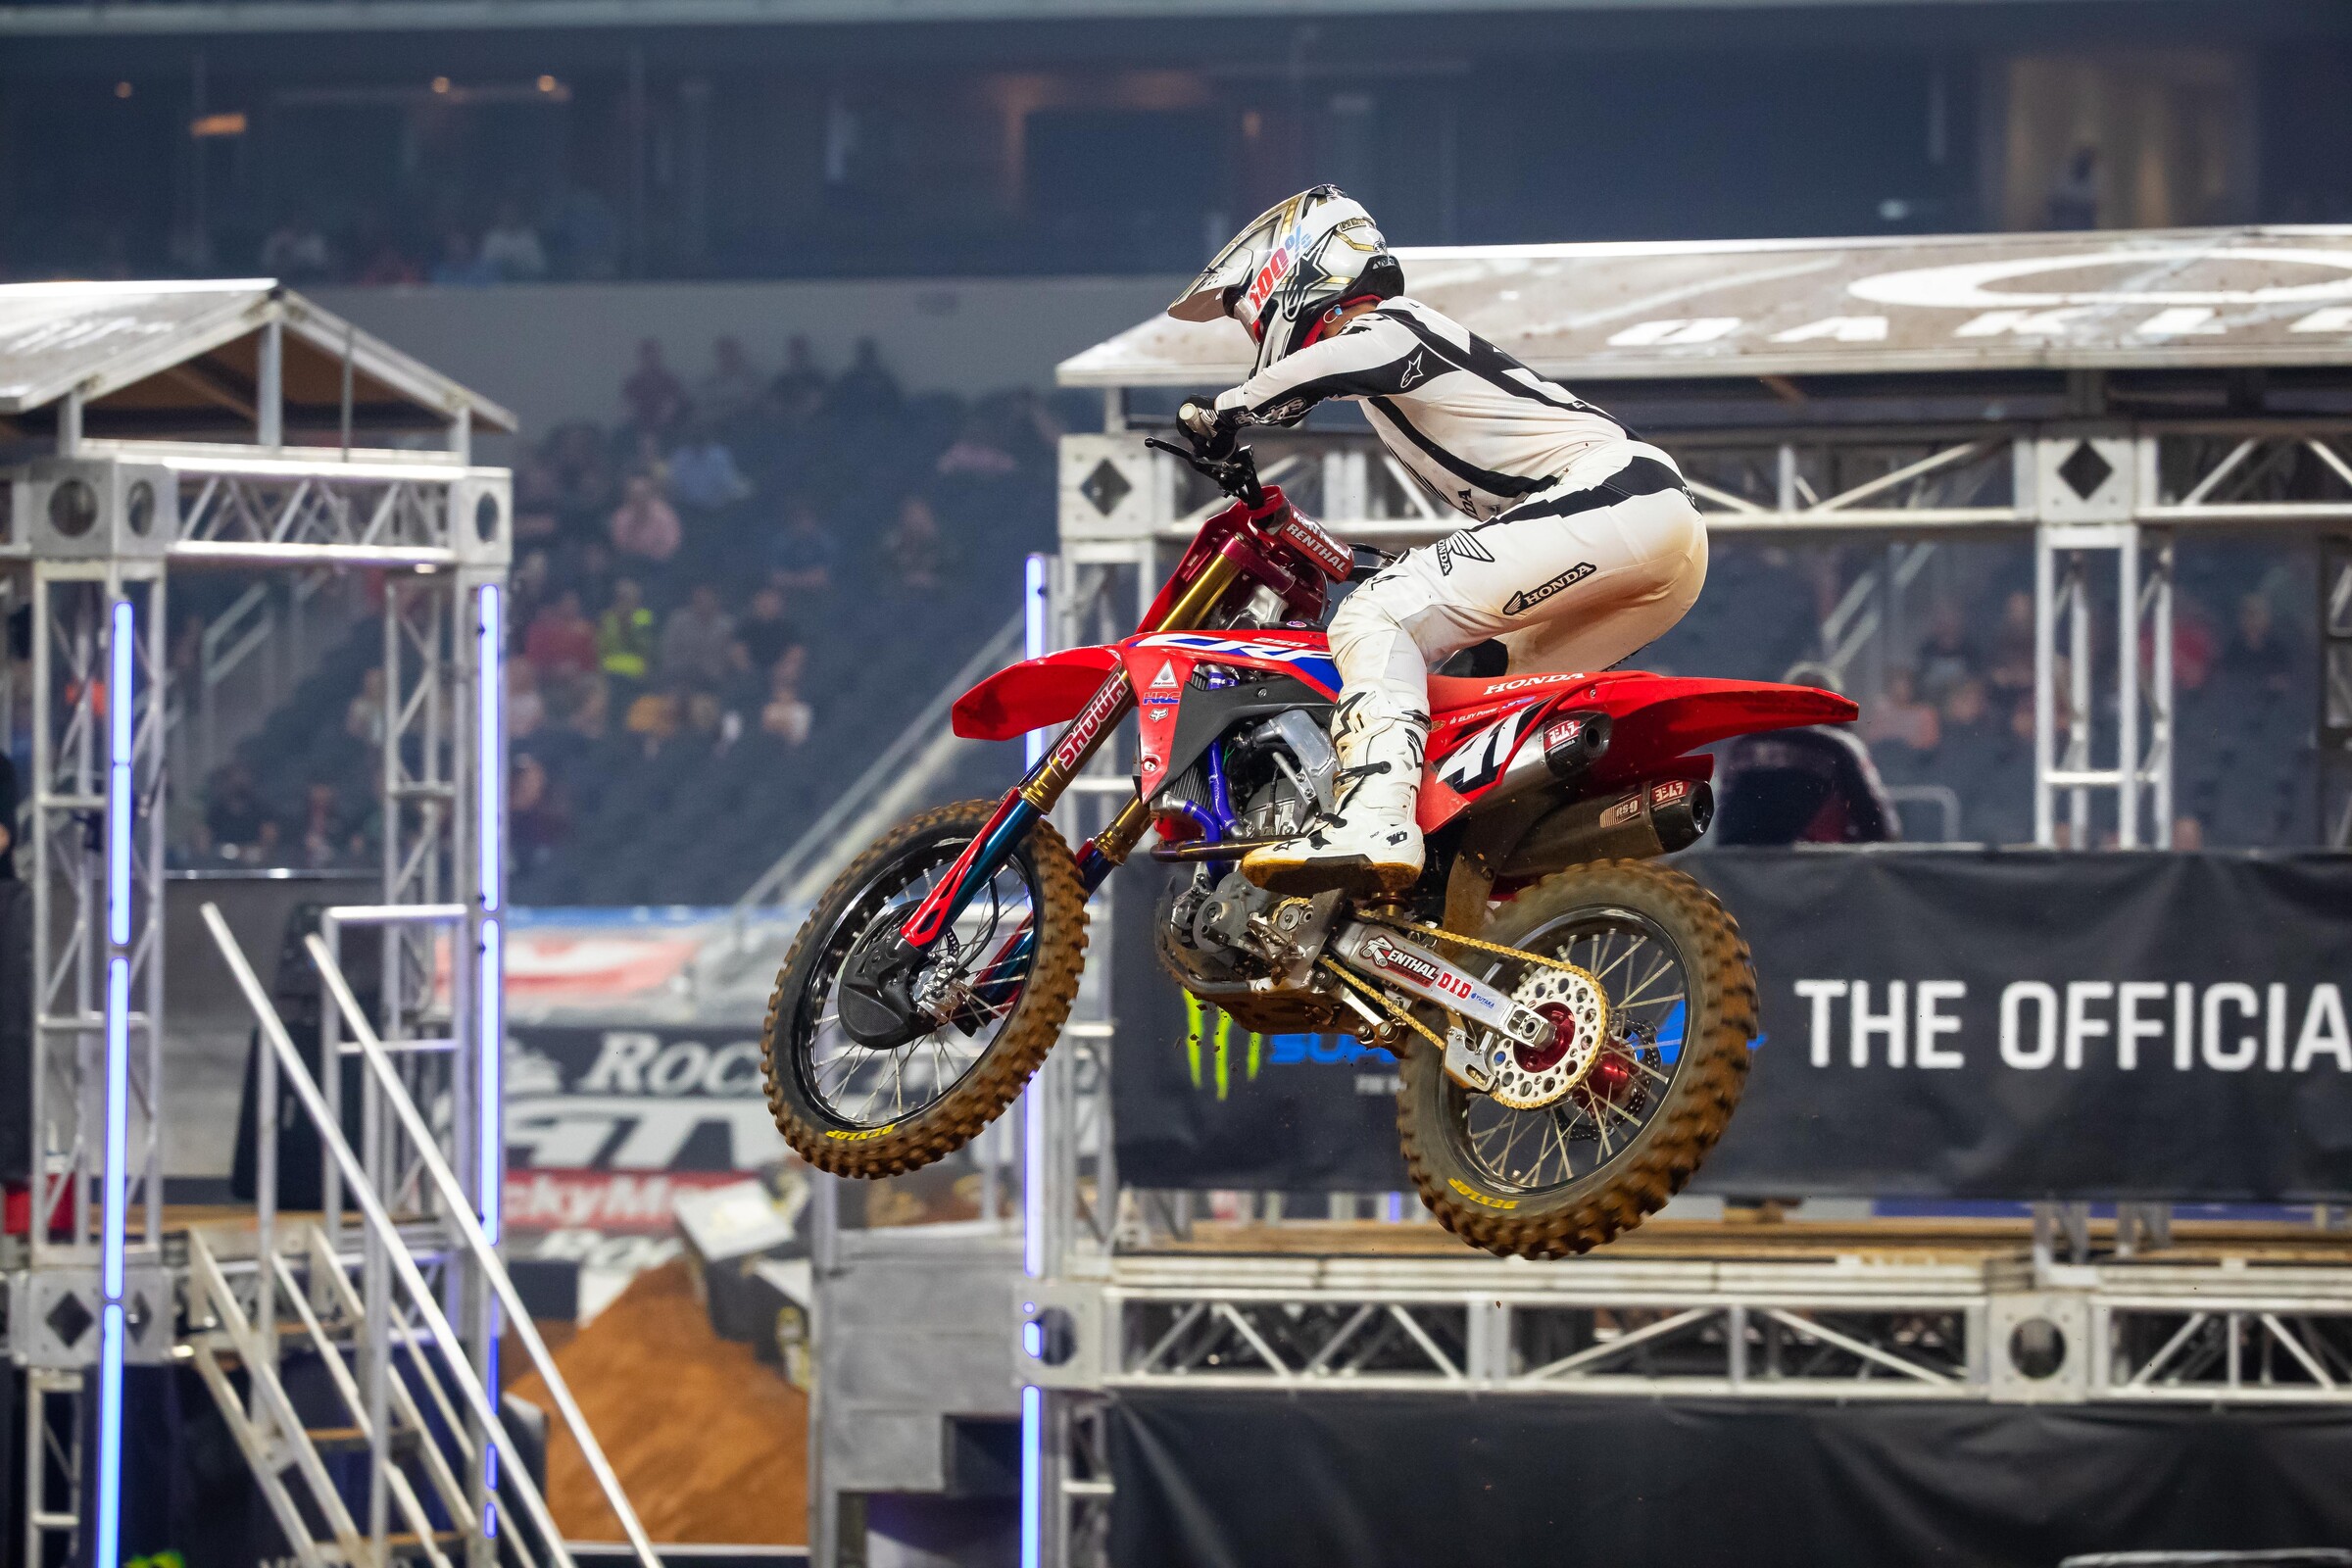 Lawrence has been solid in a championship filled with incidents for others--and with that he grabs the red plate during his first season in supercross.